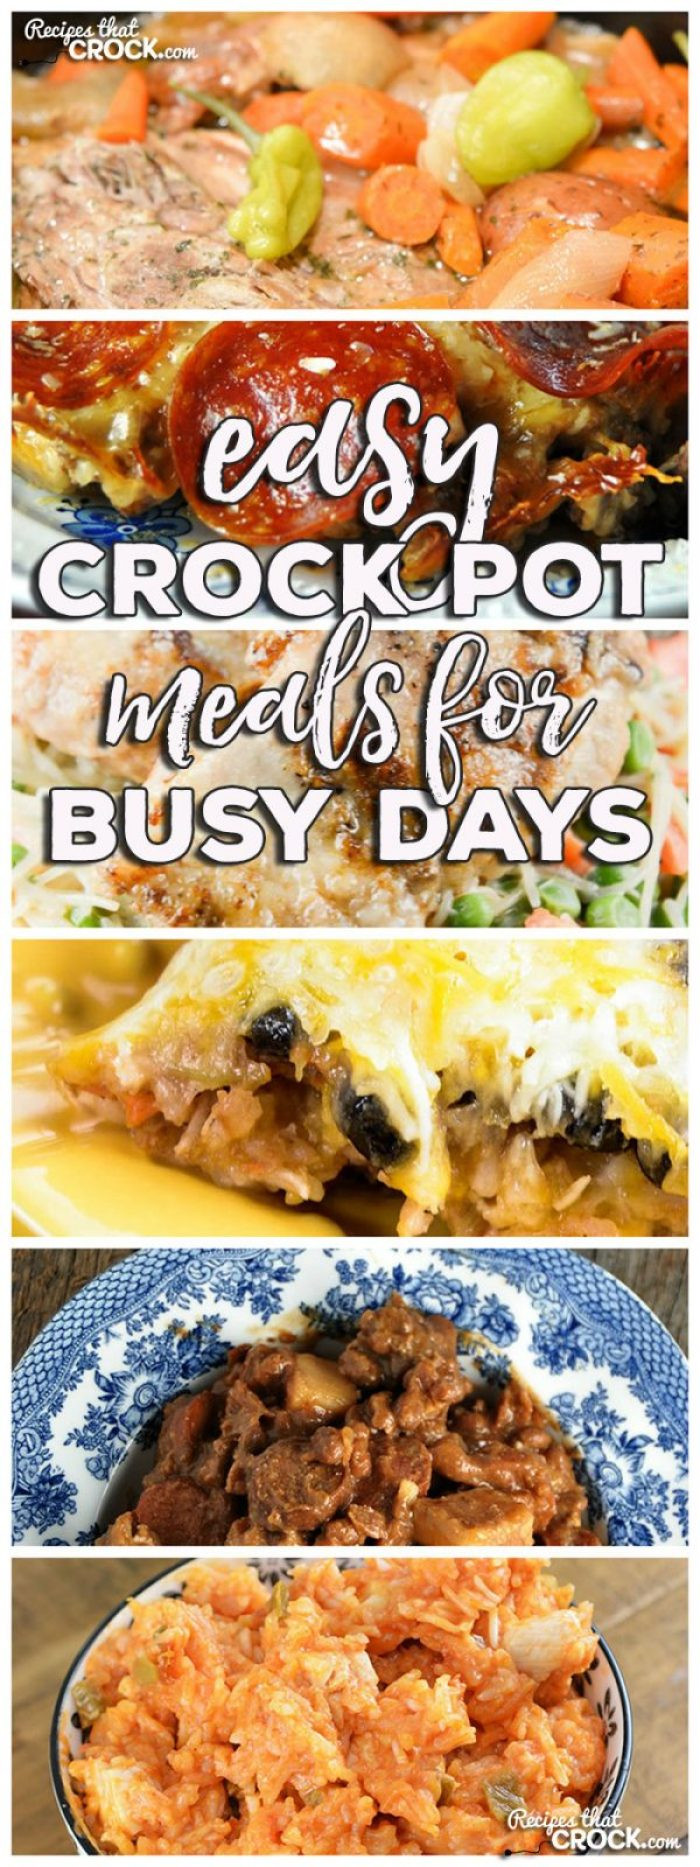 Crock Pot Dinners For Two
 Easy Crock Pot Meals for Busy Days Friday Favorites